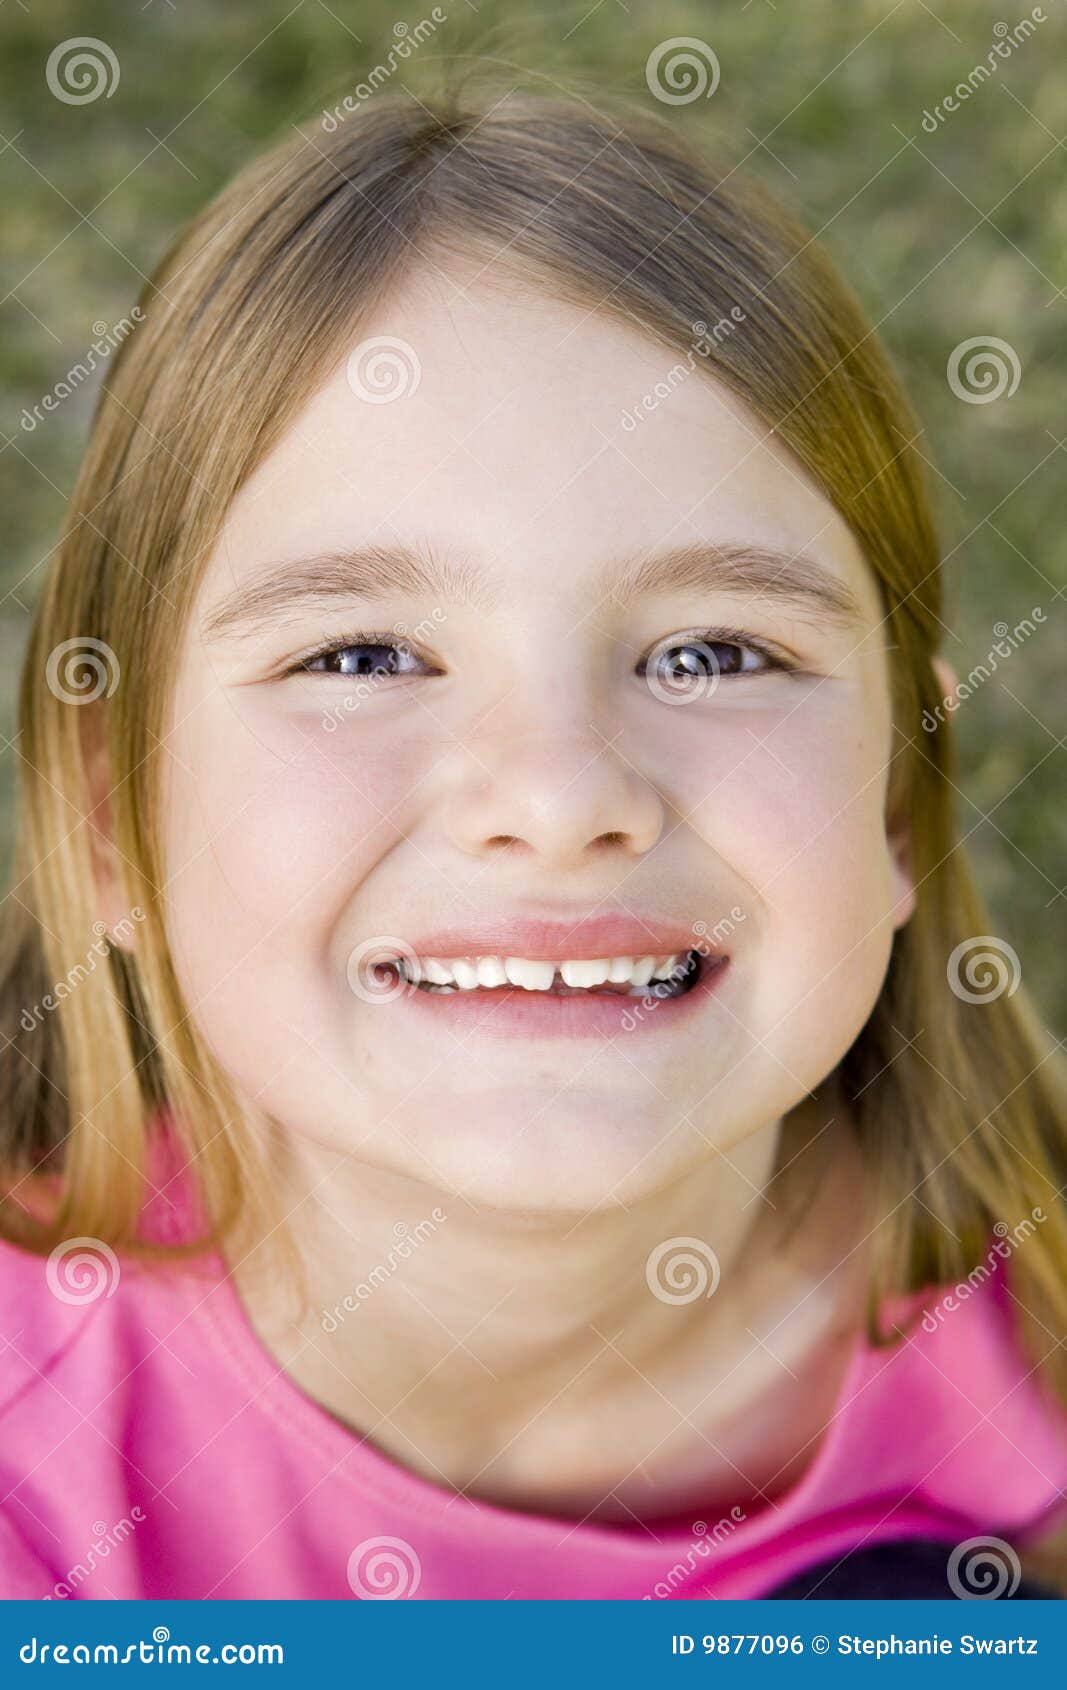 Young girl stock photo. Image of caucasian, funny, close - 9877096